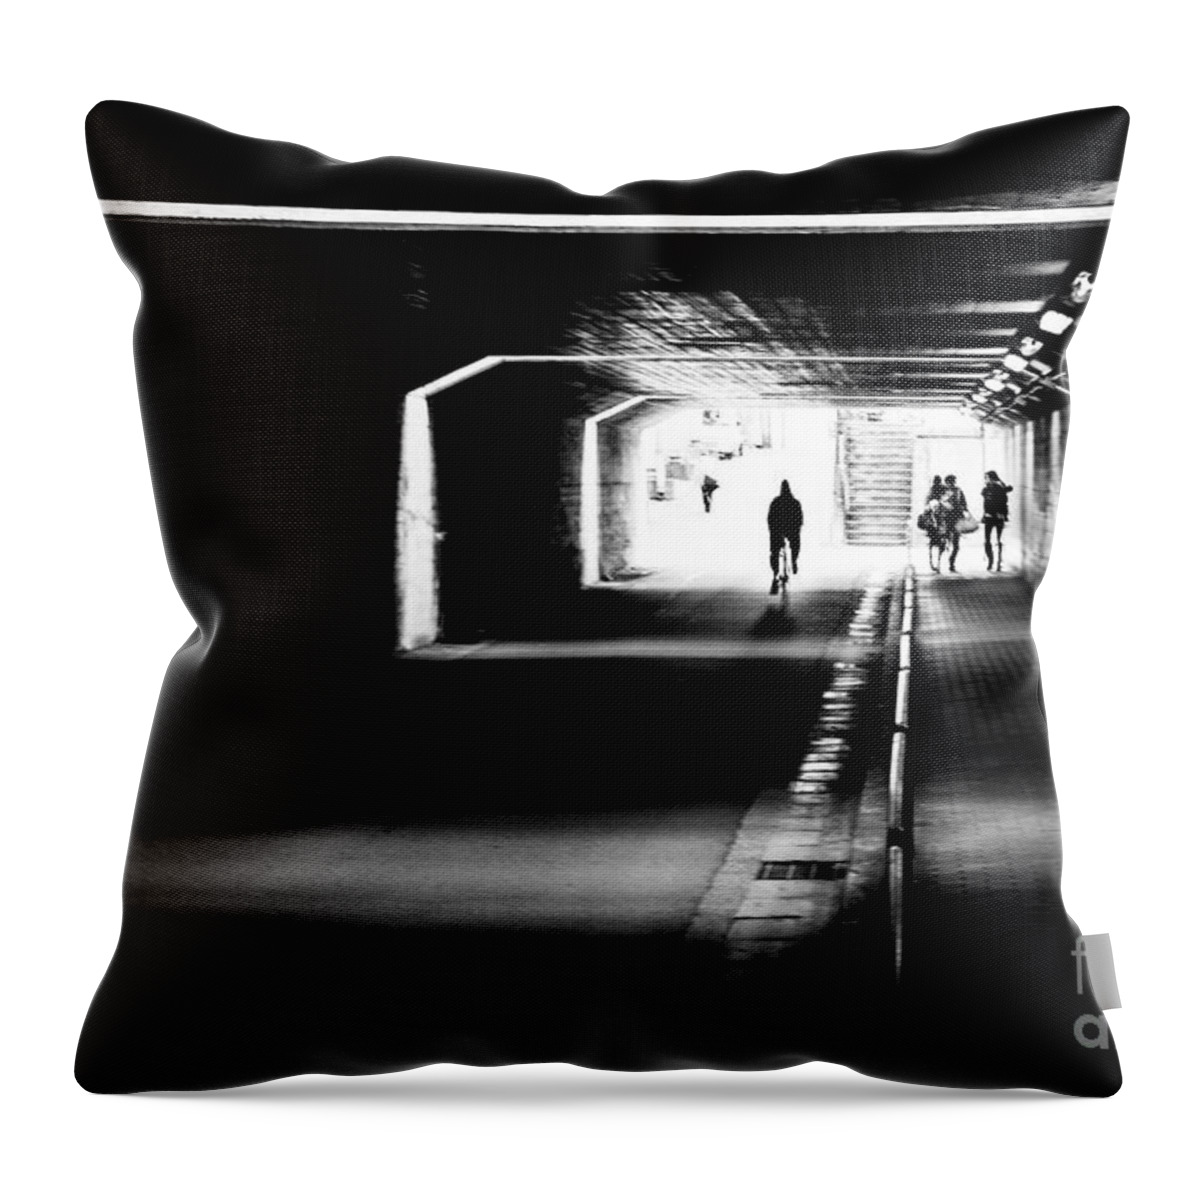 B&w Throw Pillow featuring the photograph Journey Though by RicharD Murphy